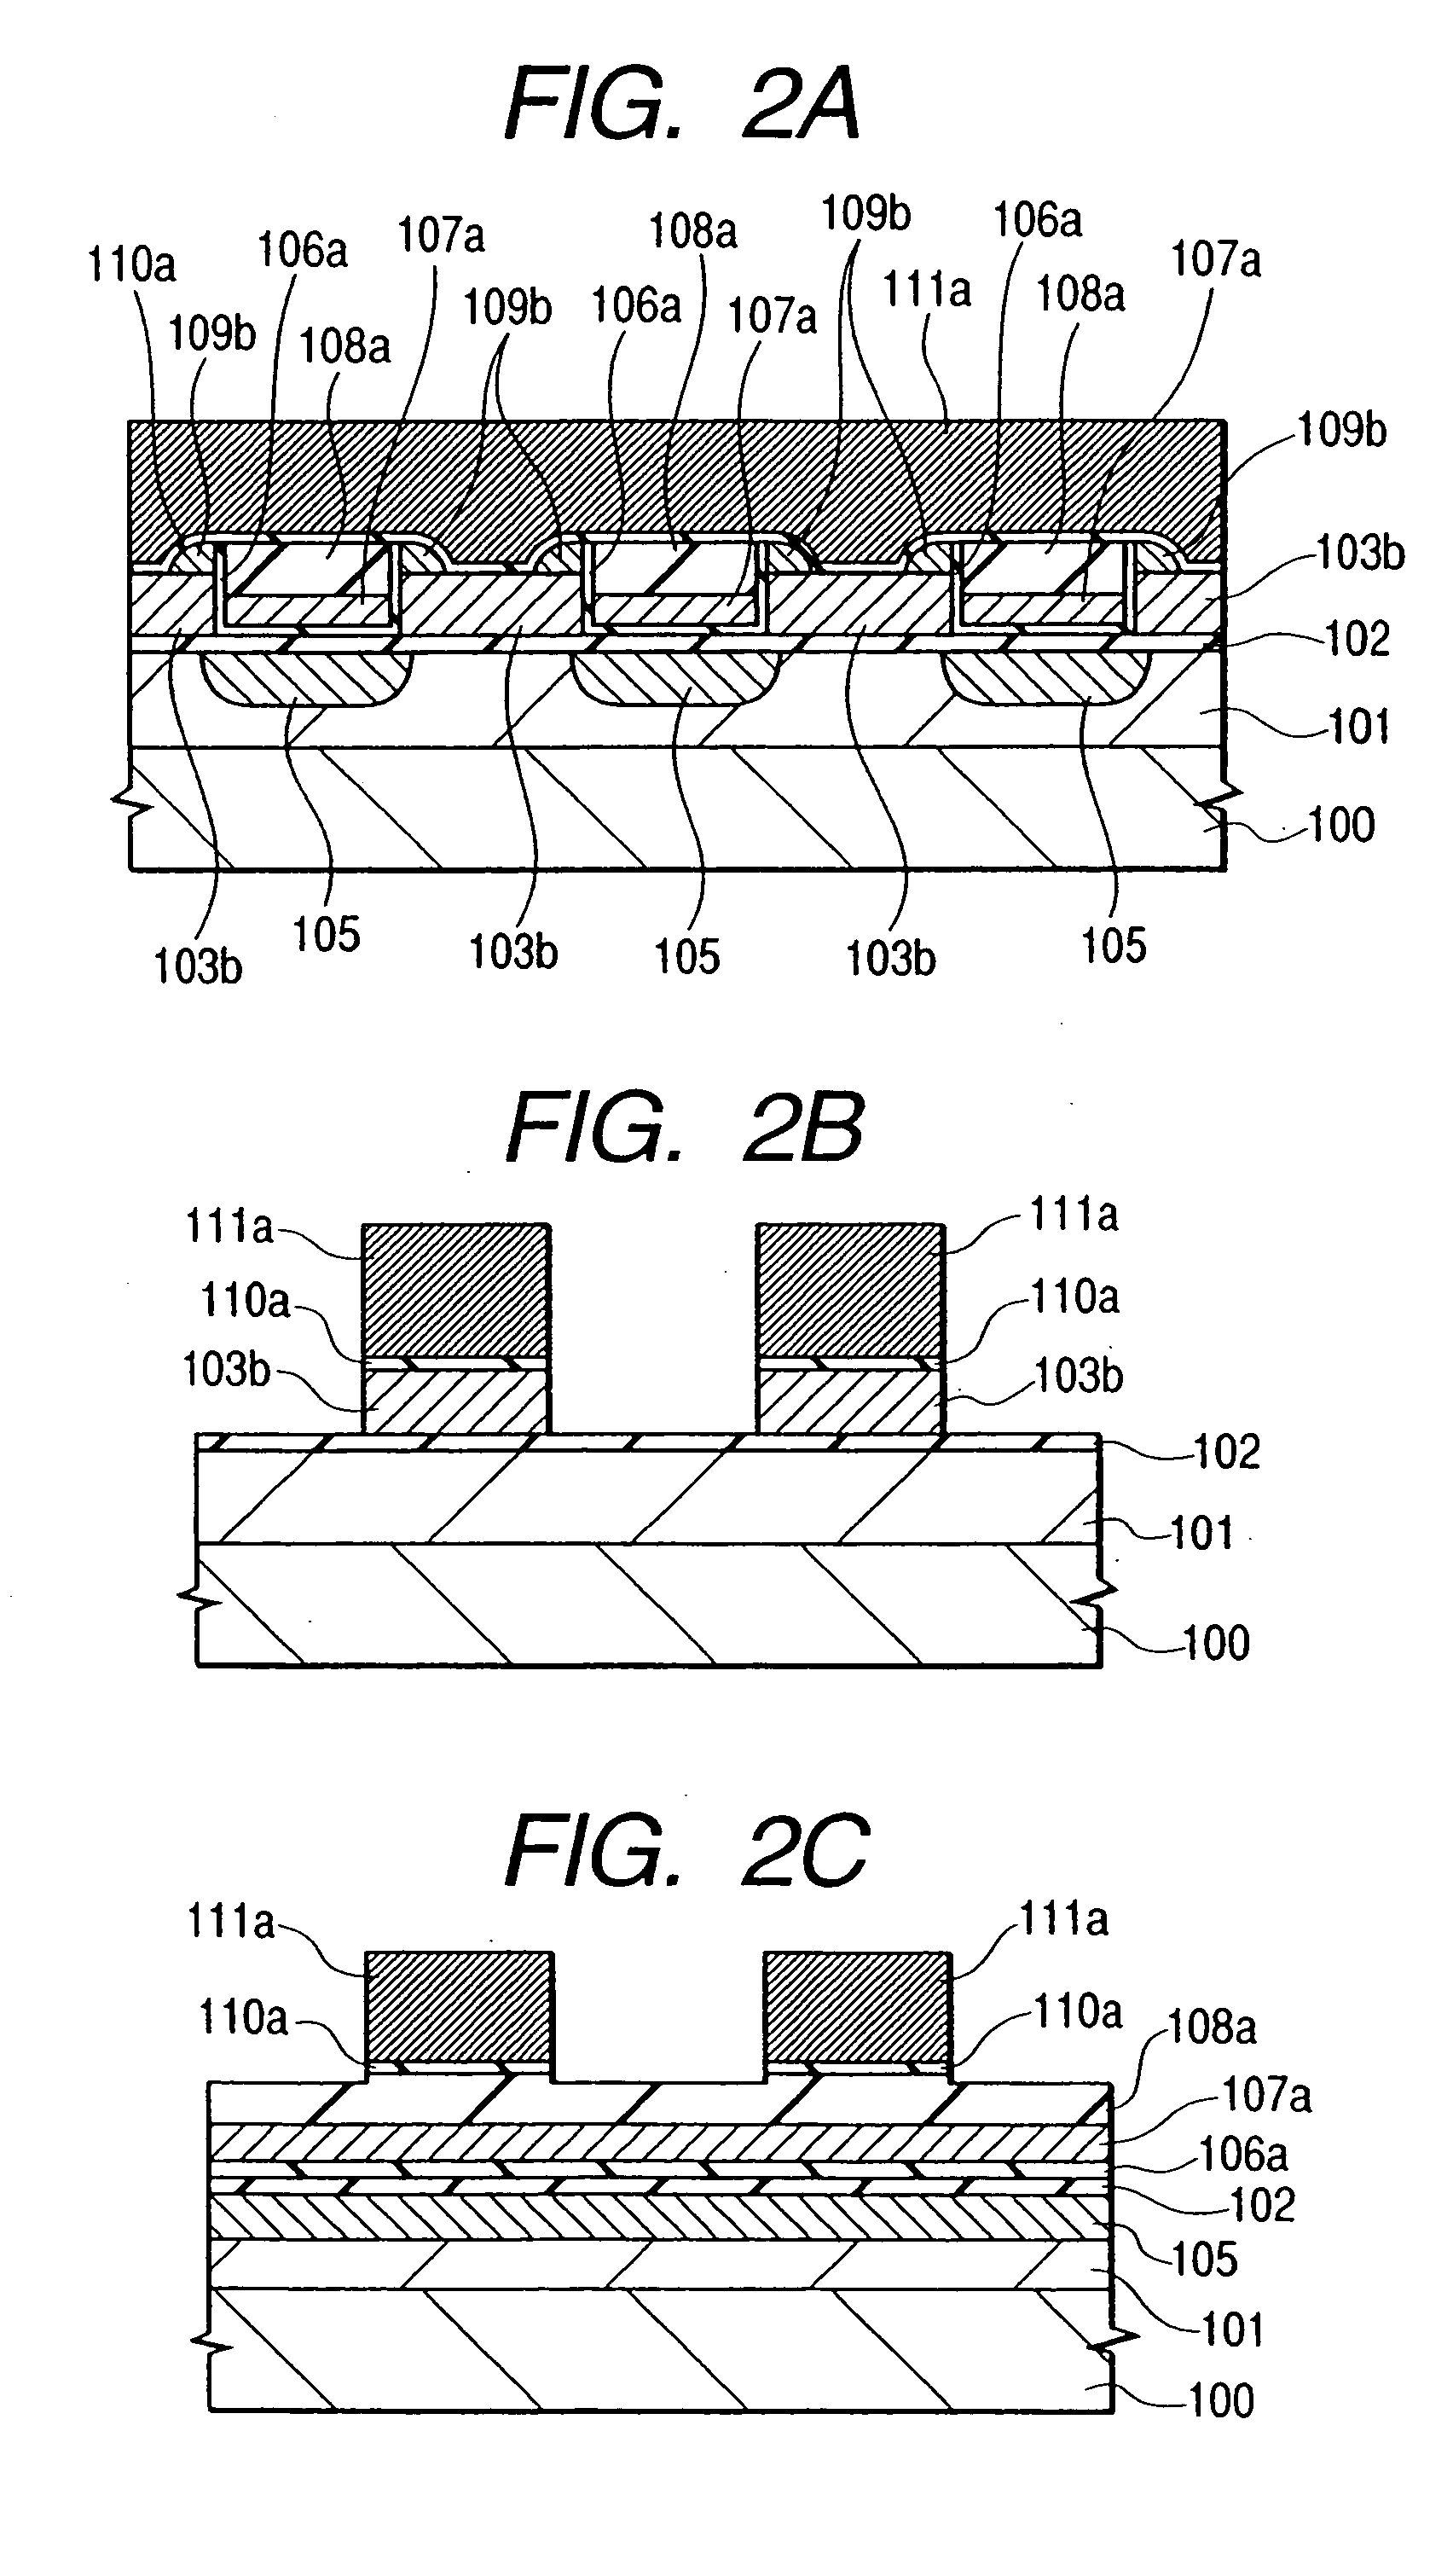 Semiconductor integrated circuit device including first, second and third gates